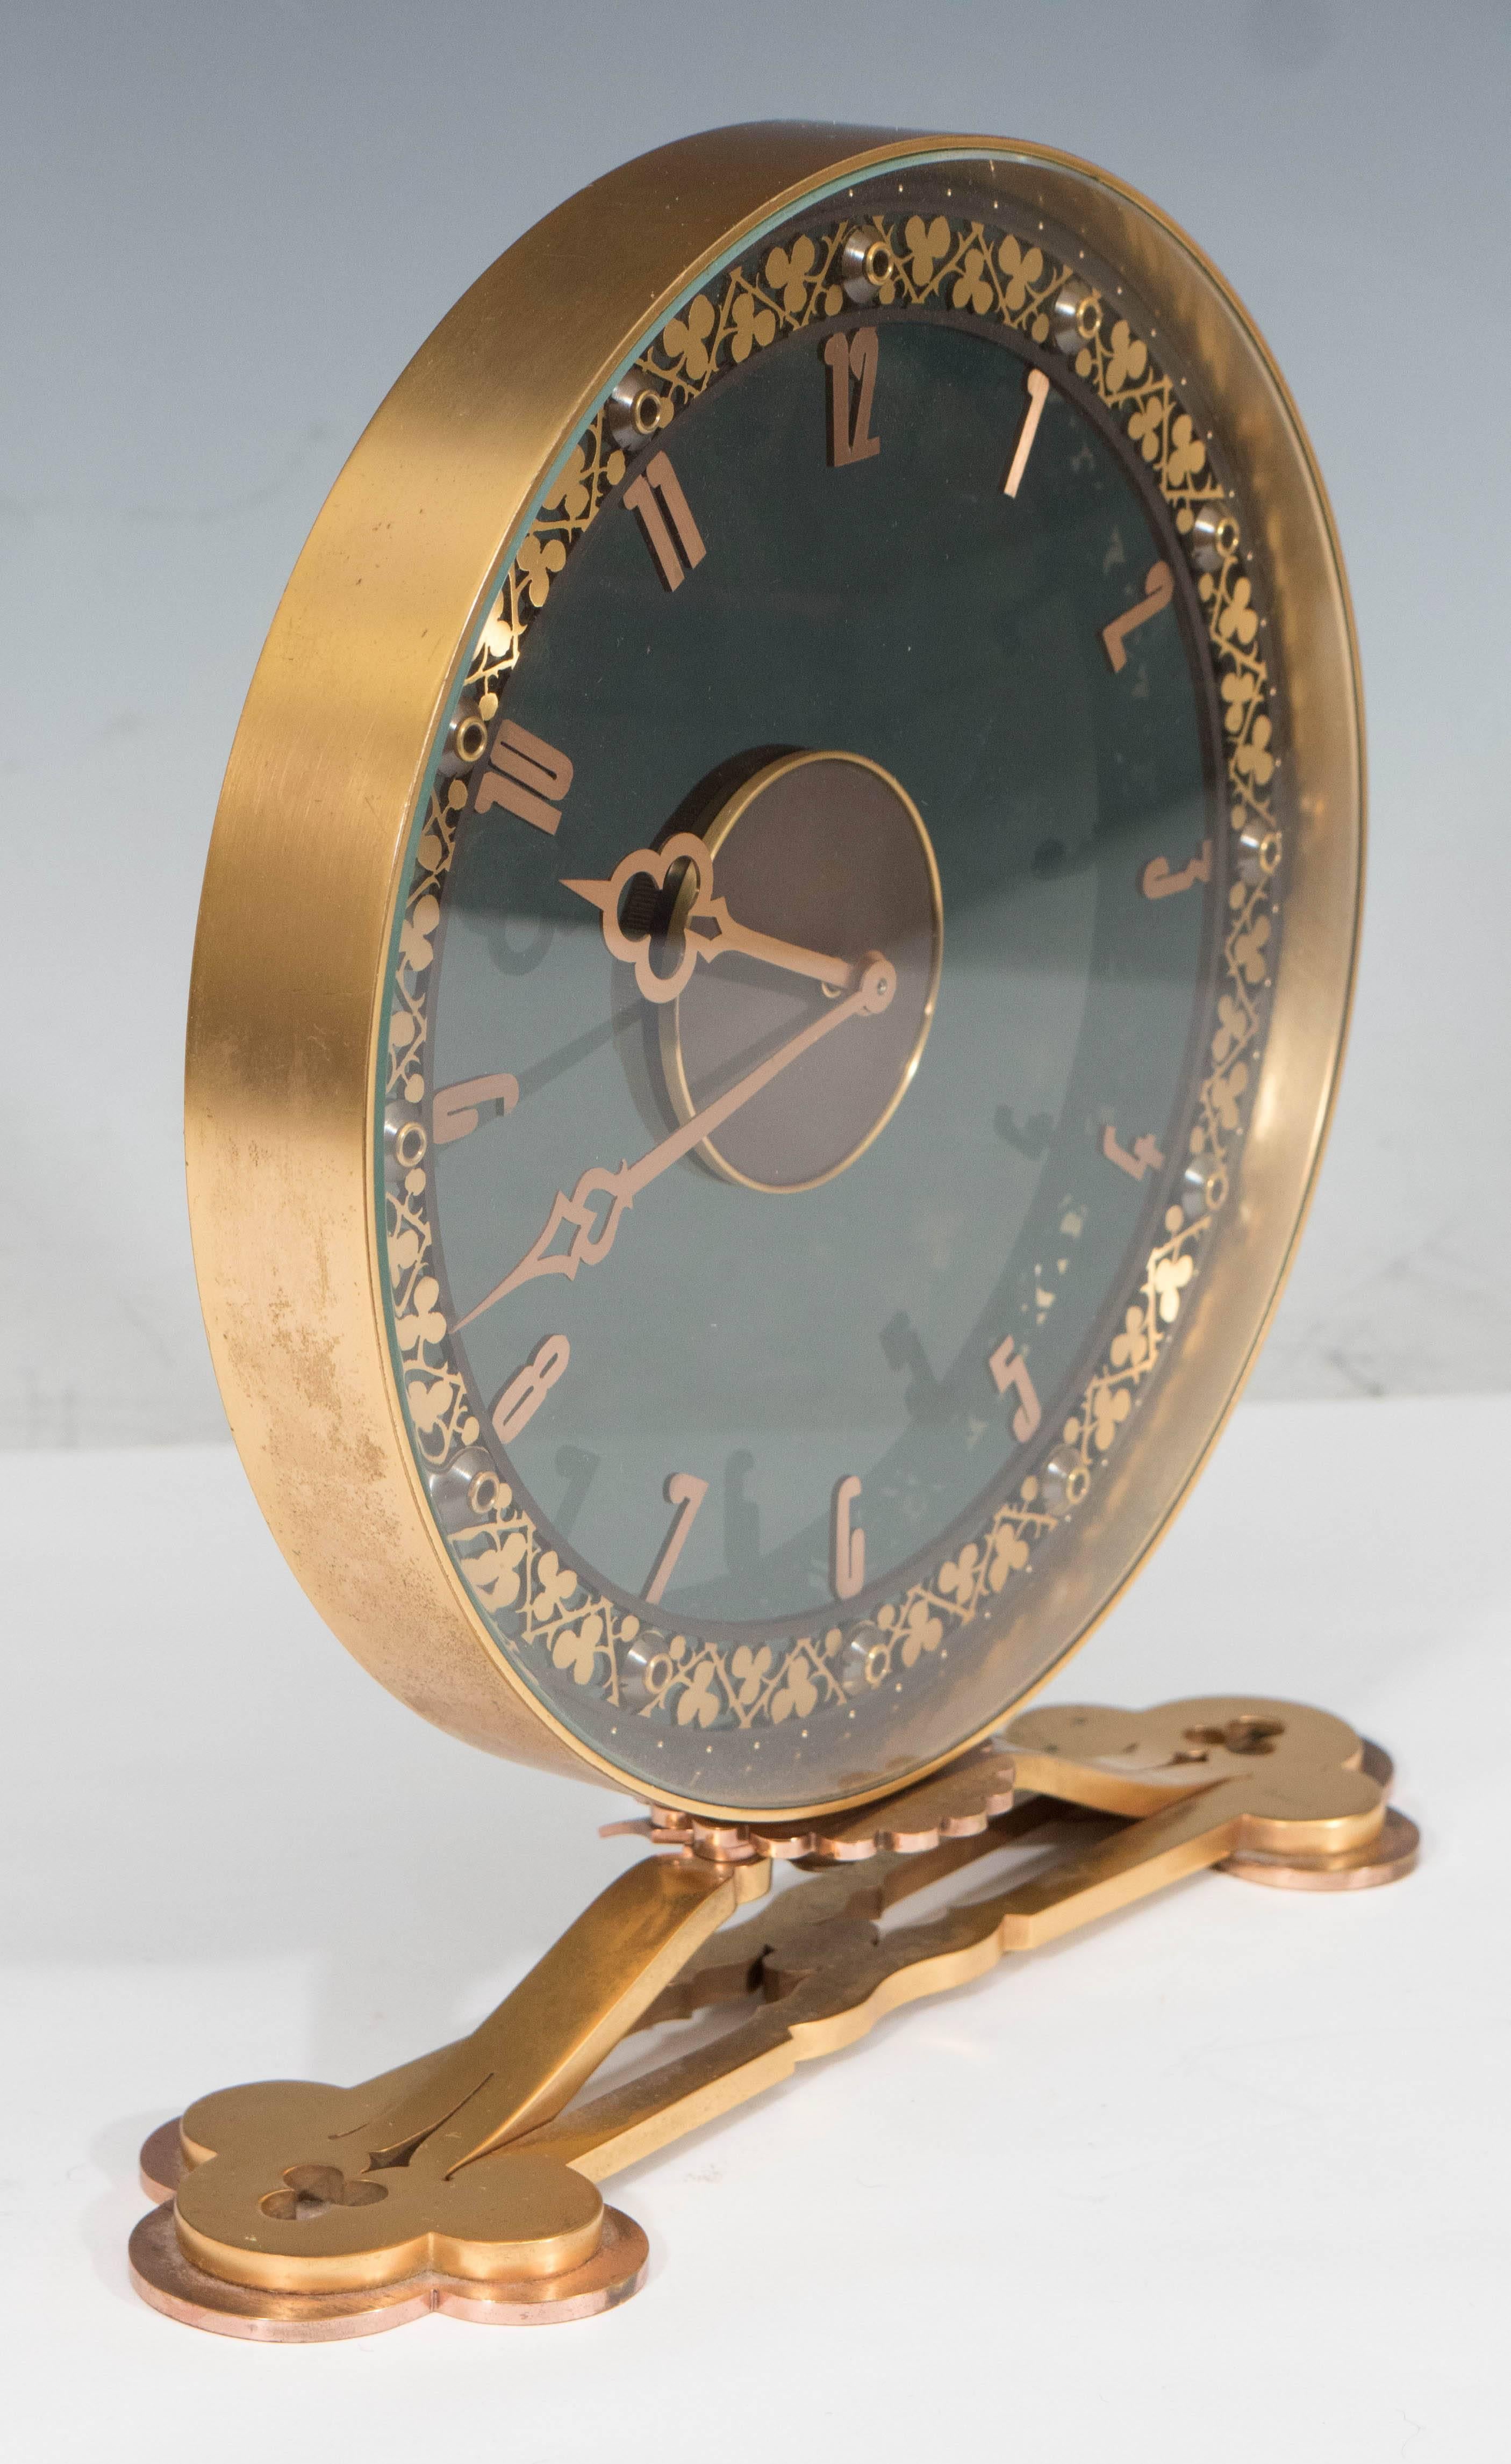 Swiss Jaeger-LeCoultre Desk Clock in Gilded Smoked Glass